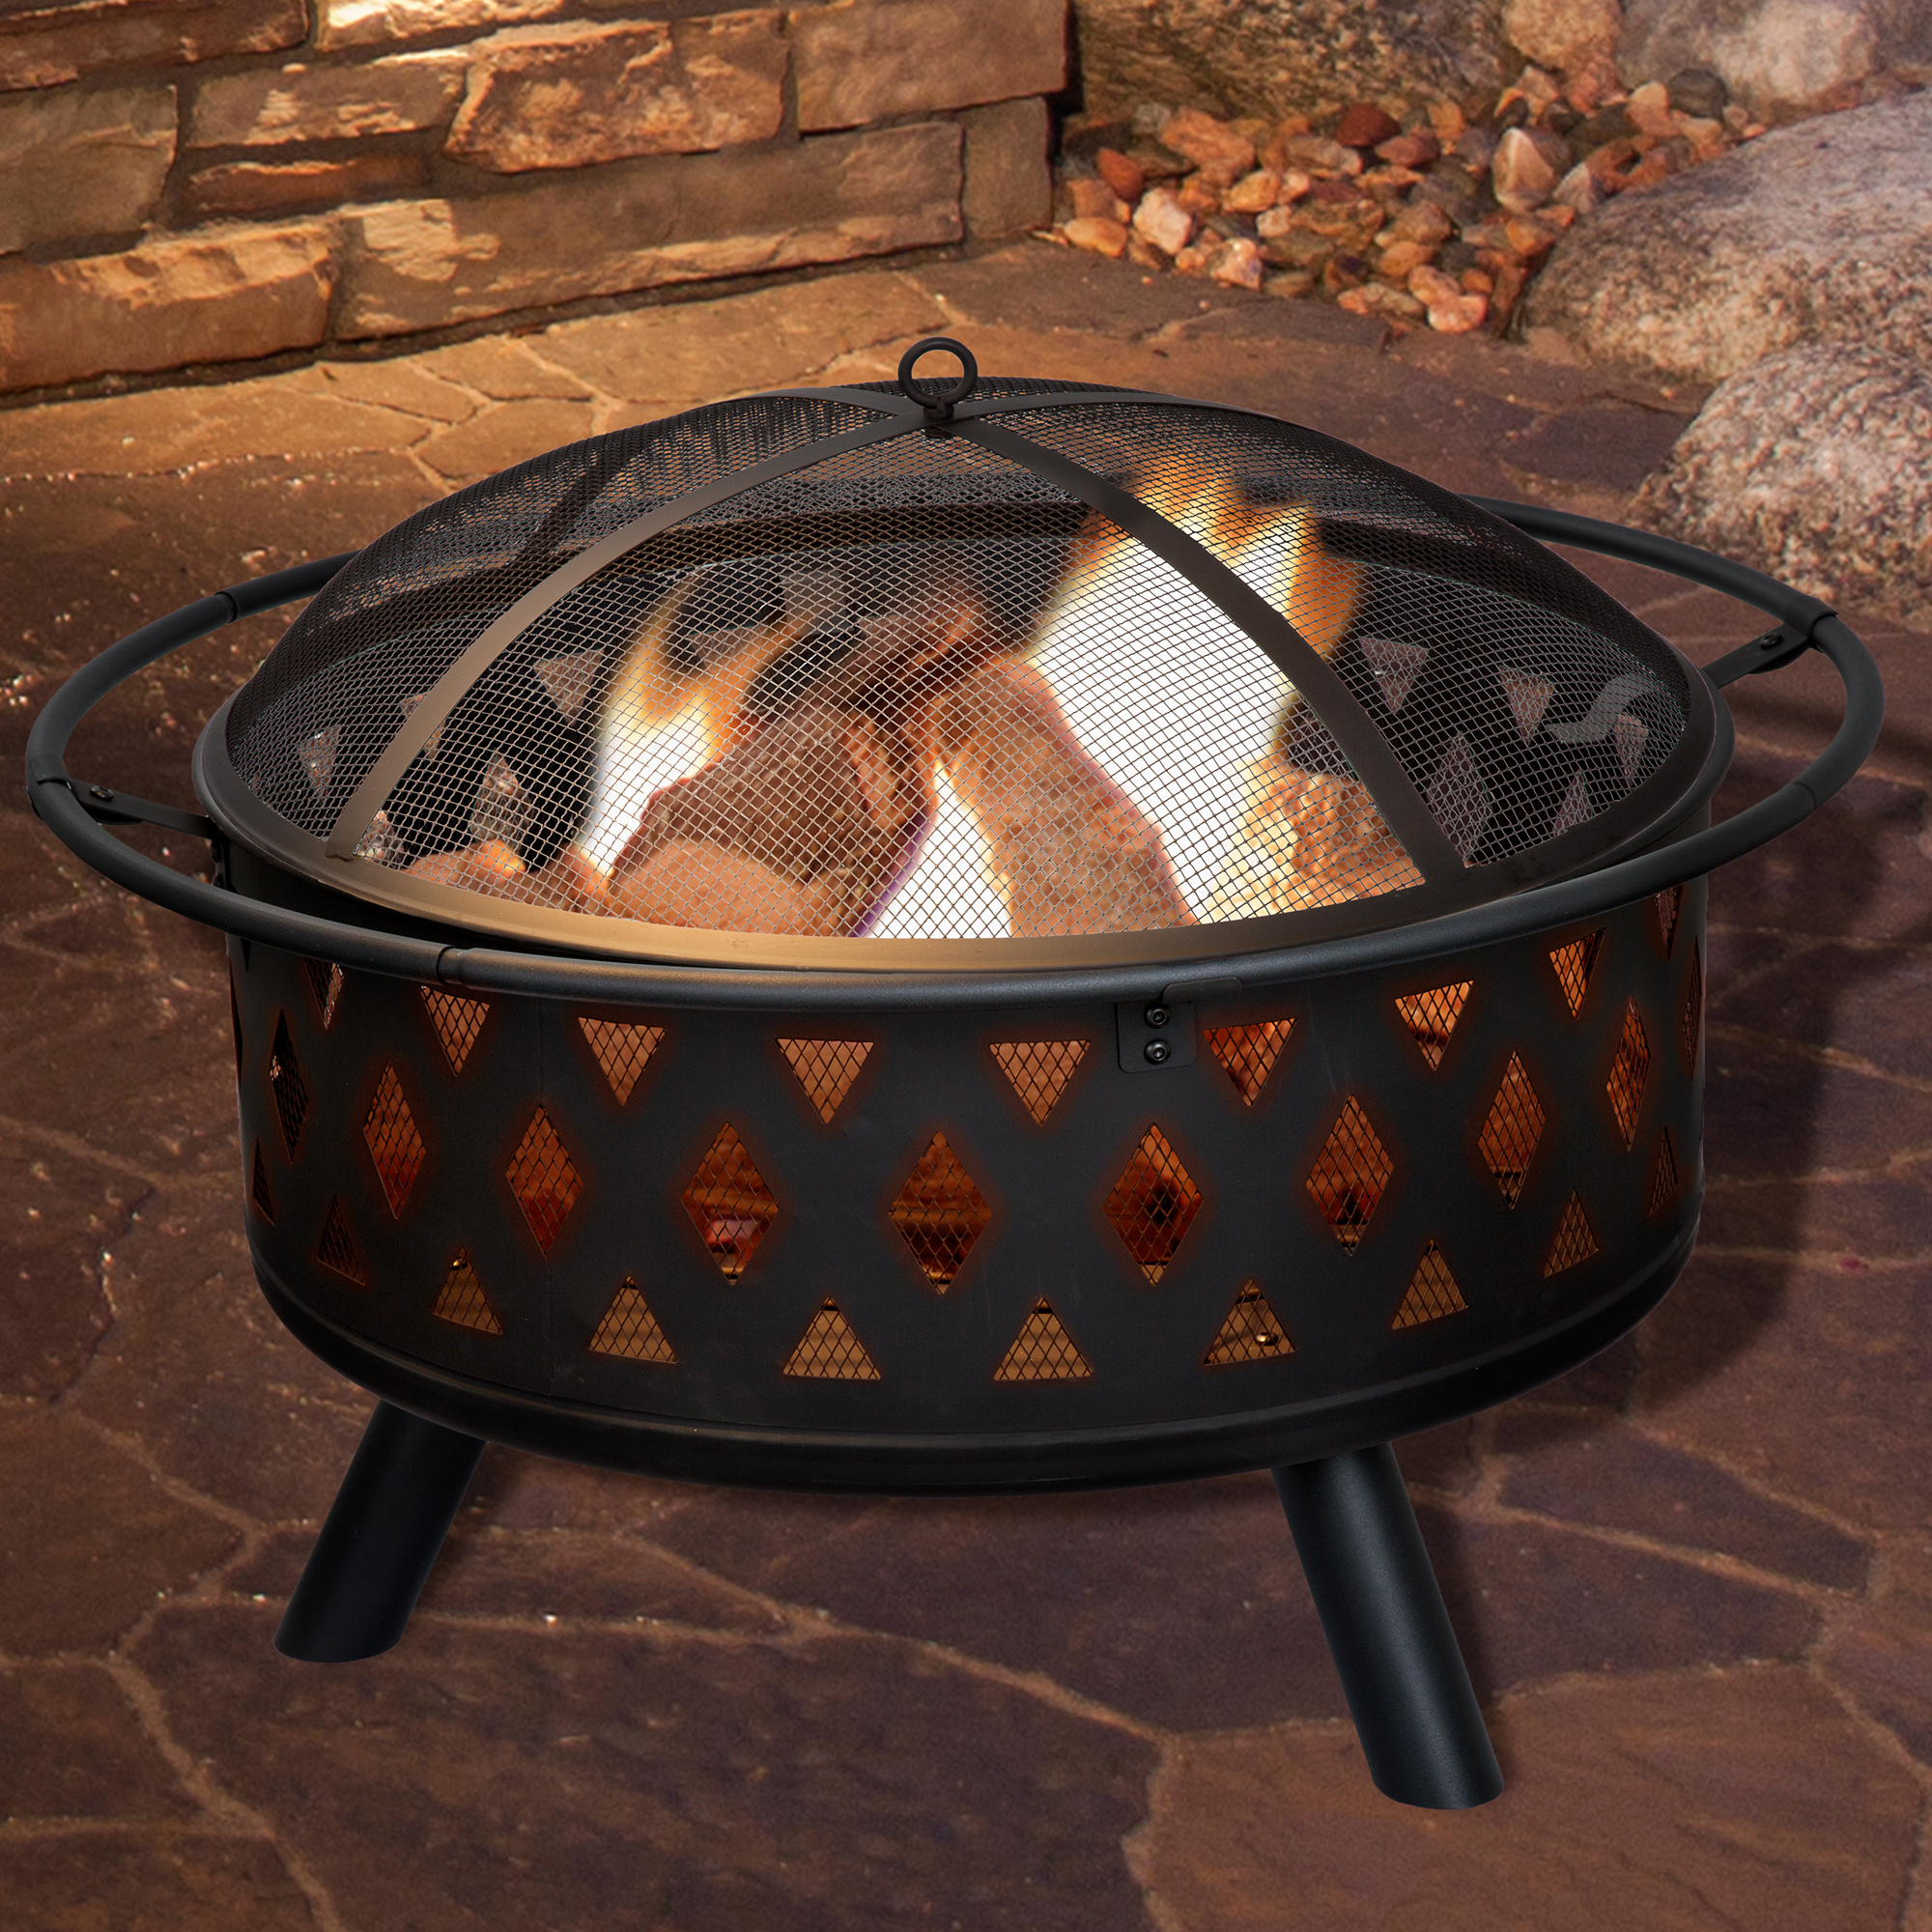 Pure Garden 32-Inch Outdoor Wood Burning Fire Pit with PVC Cover (Black) - image 1 of 10